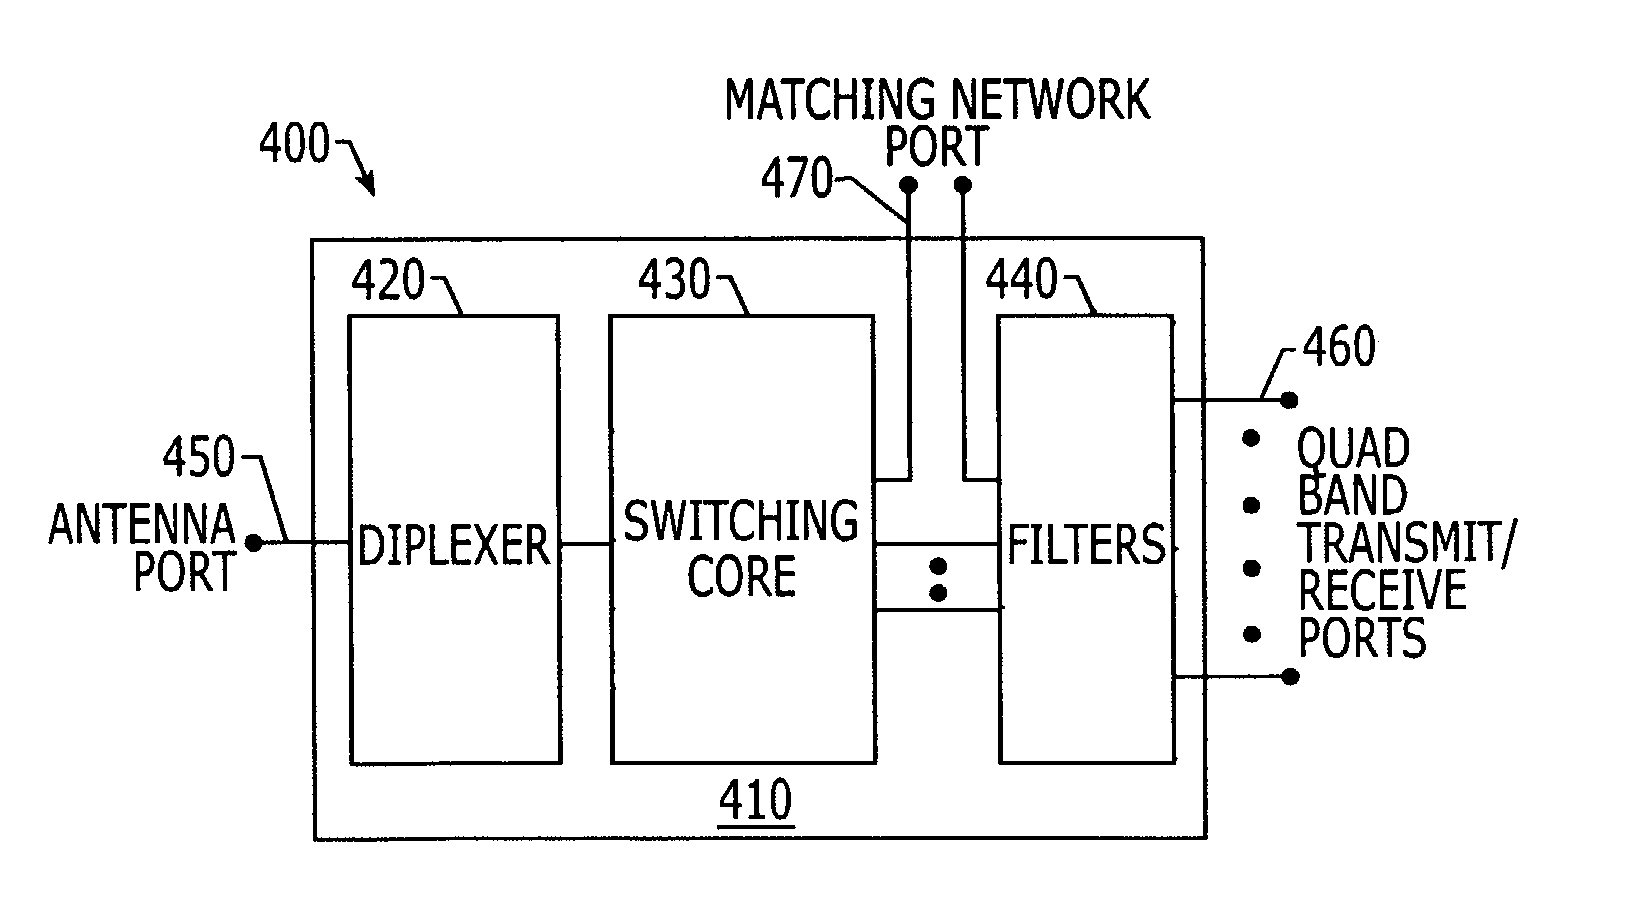 Quad band antenna interface modules including matching network ports